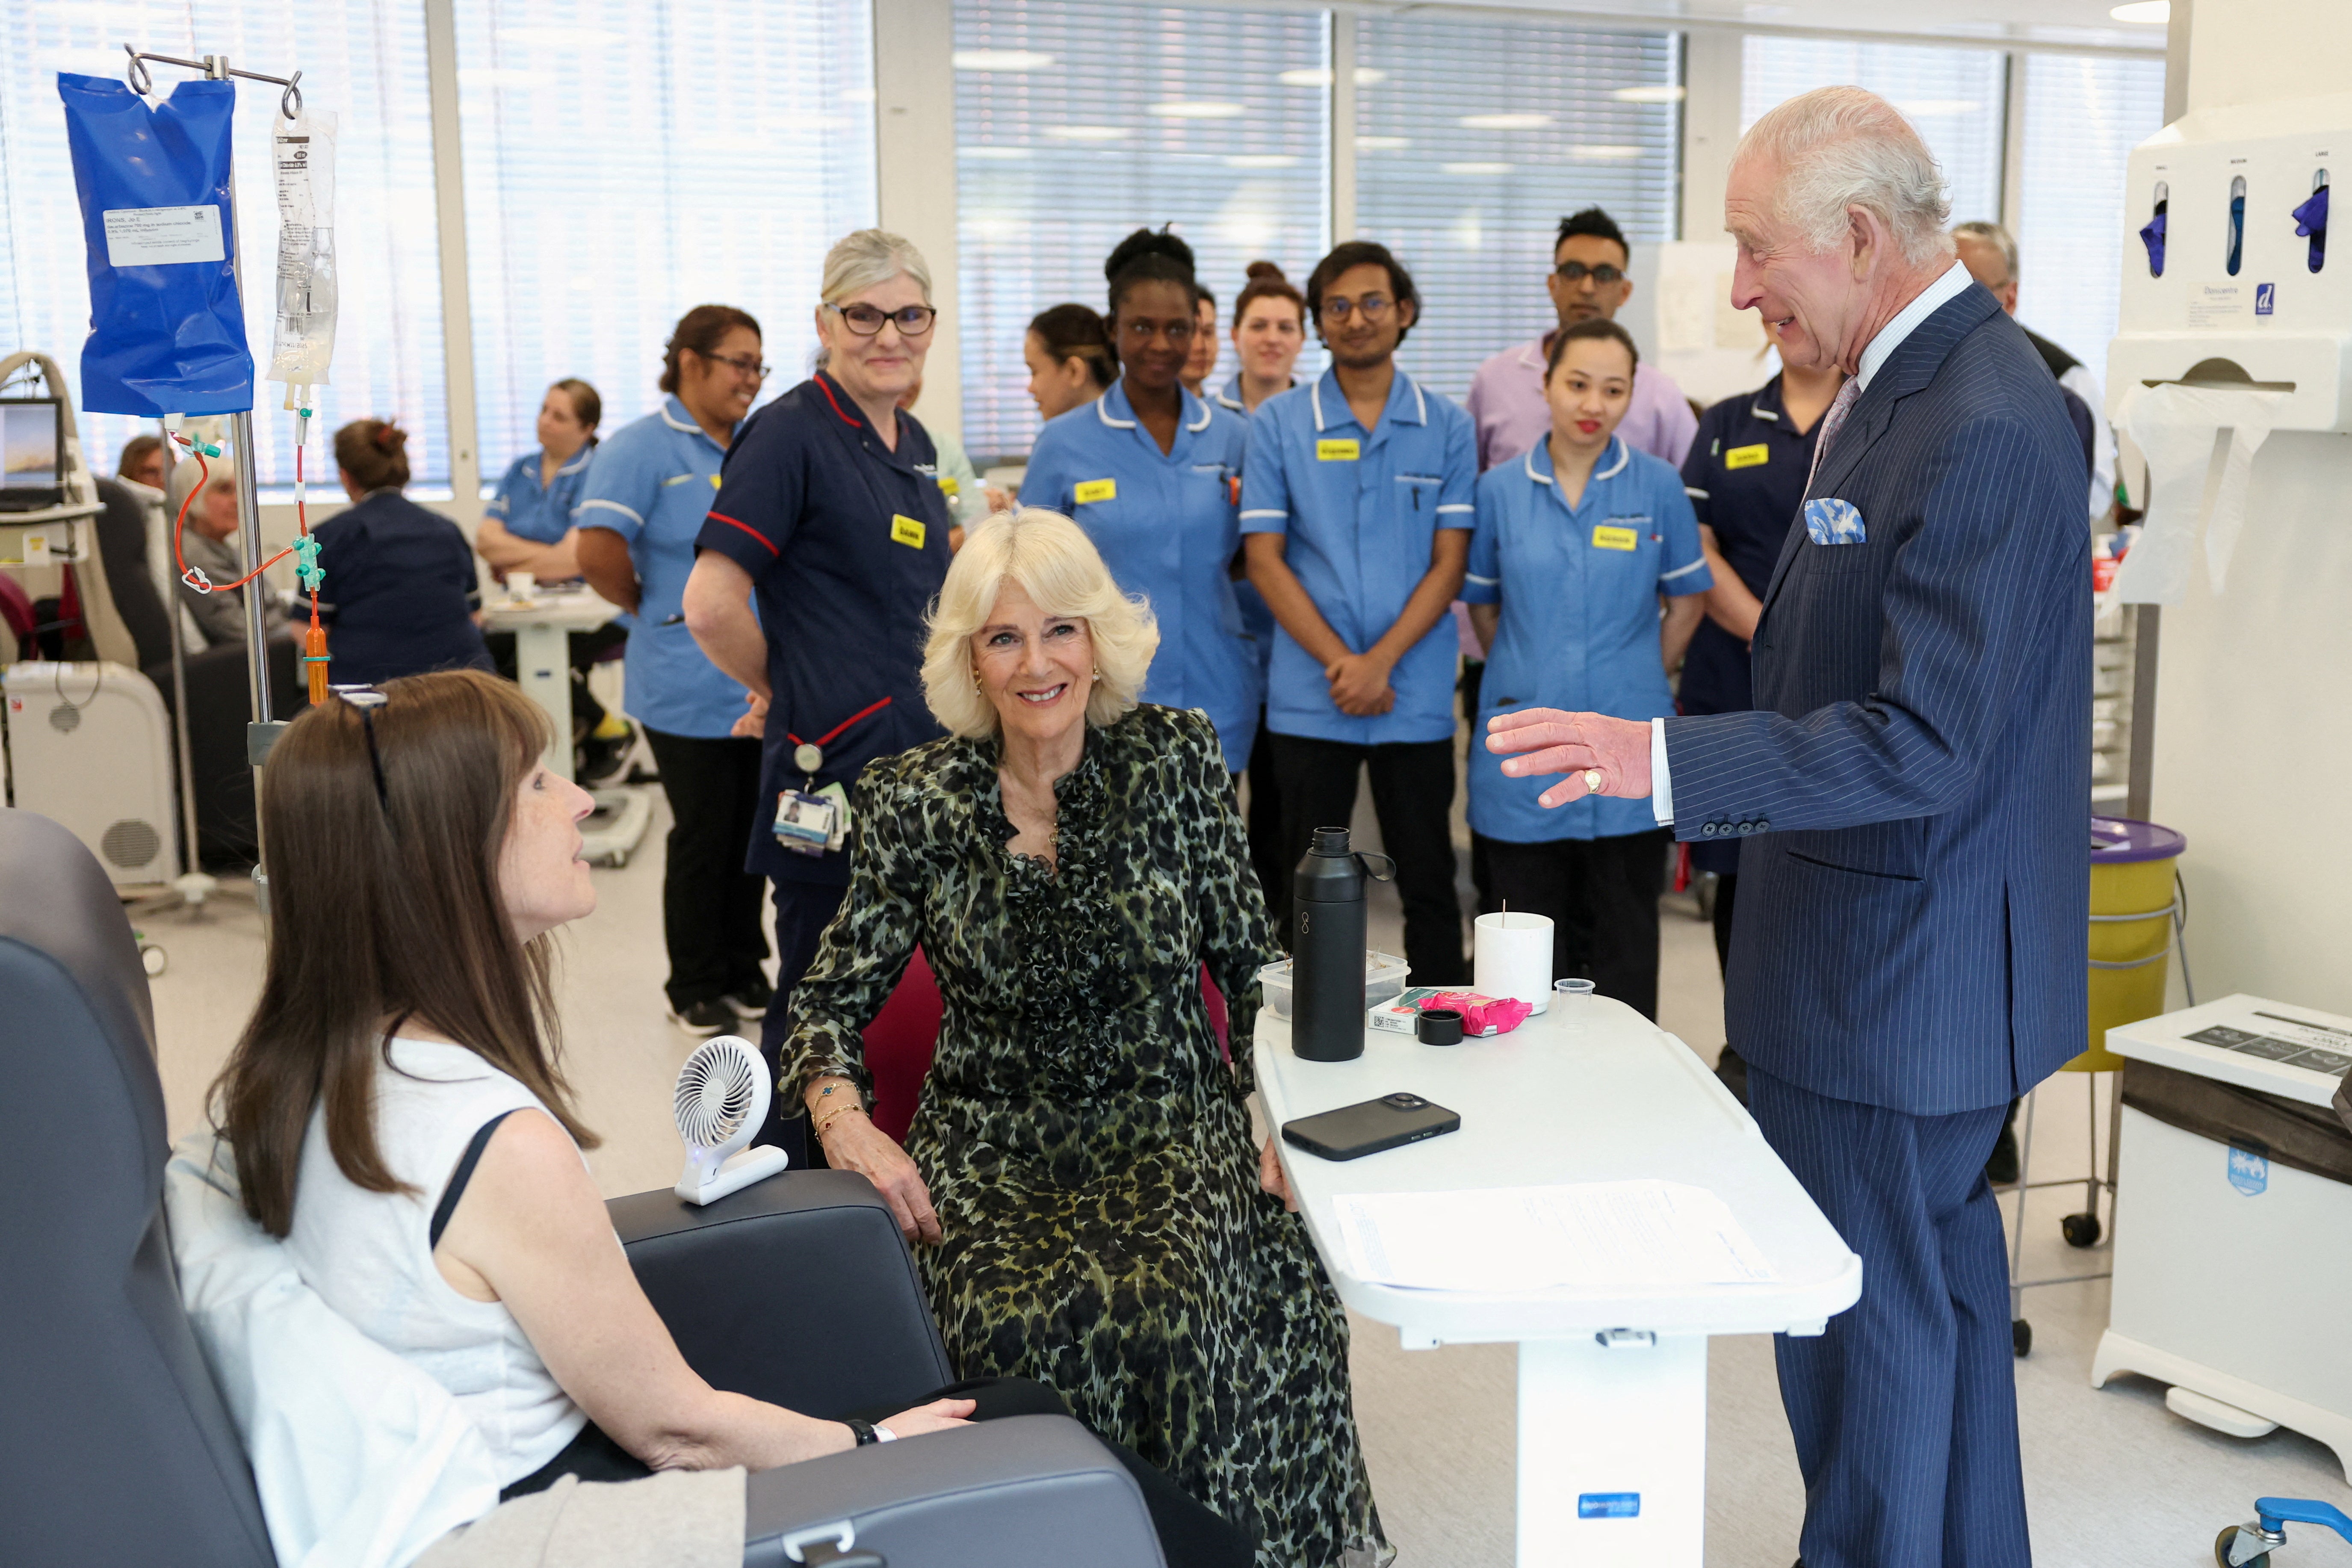 Charles and Camilla meet with patient Jo Irons during a visit to the University College Hospital Macmillan Cancer Centre in London